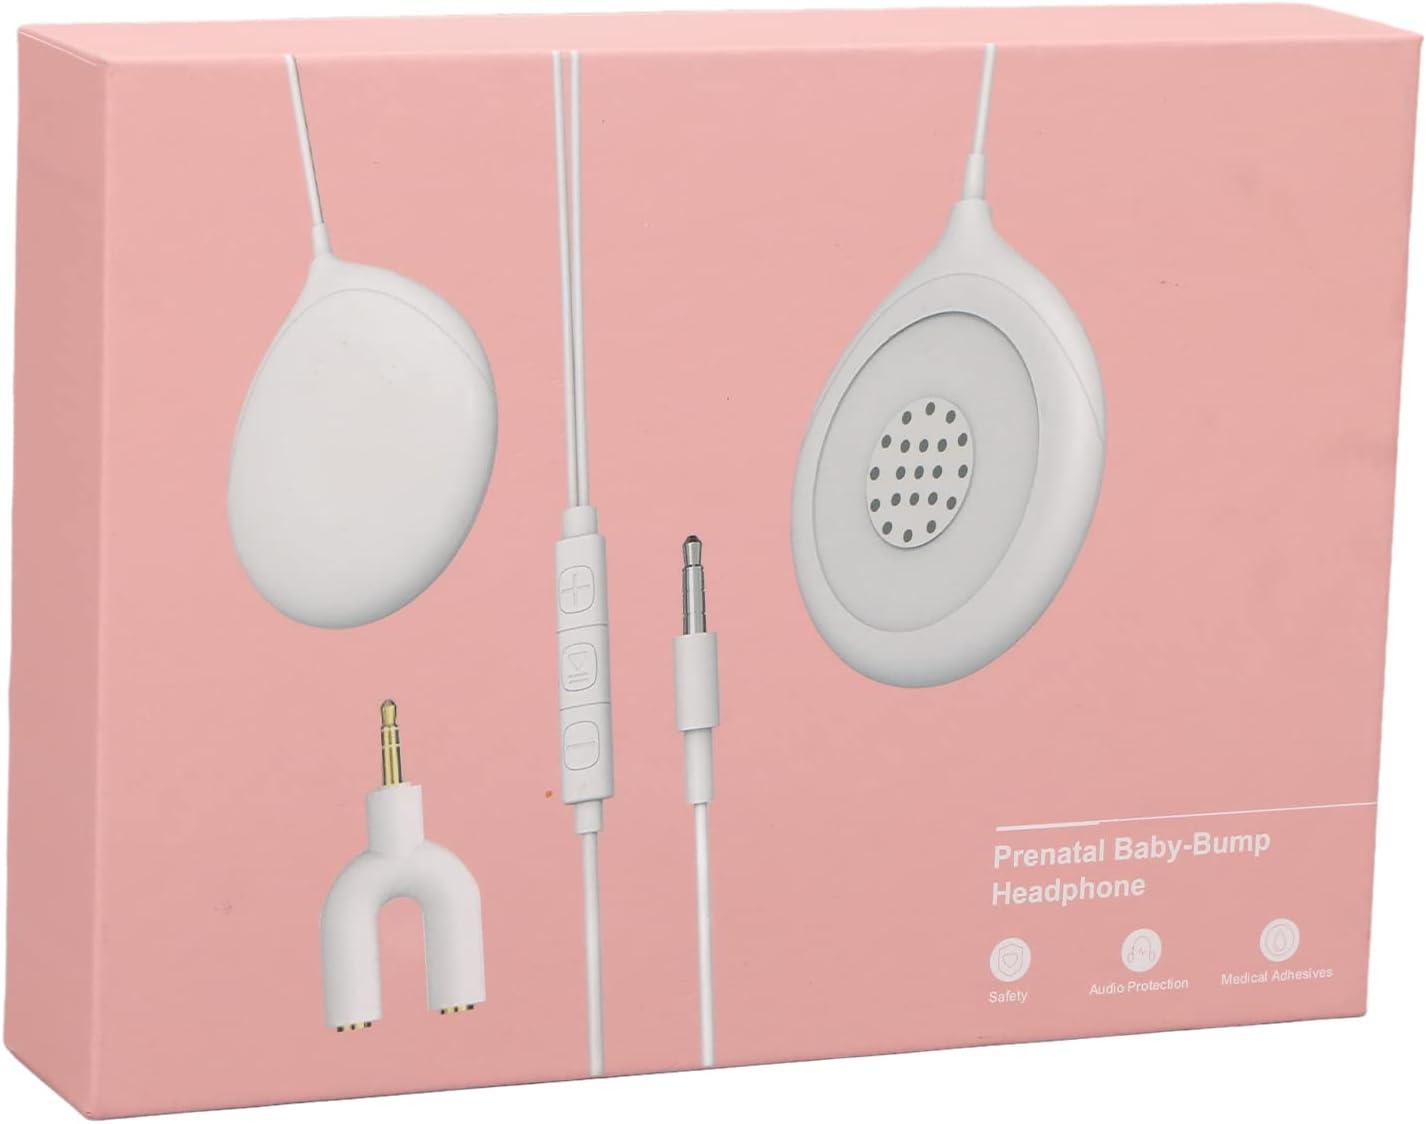 BABY BUMP HEADPHONES Music Play Prenatal Belly Speaker Gift For Pregnant  DTS $24.09 - PicClick AU